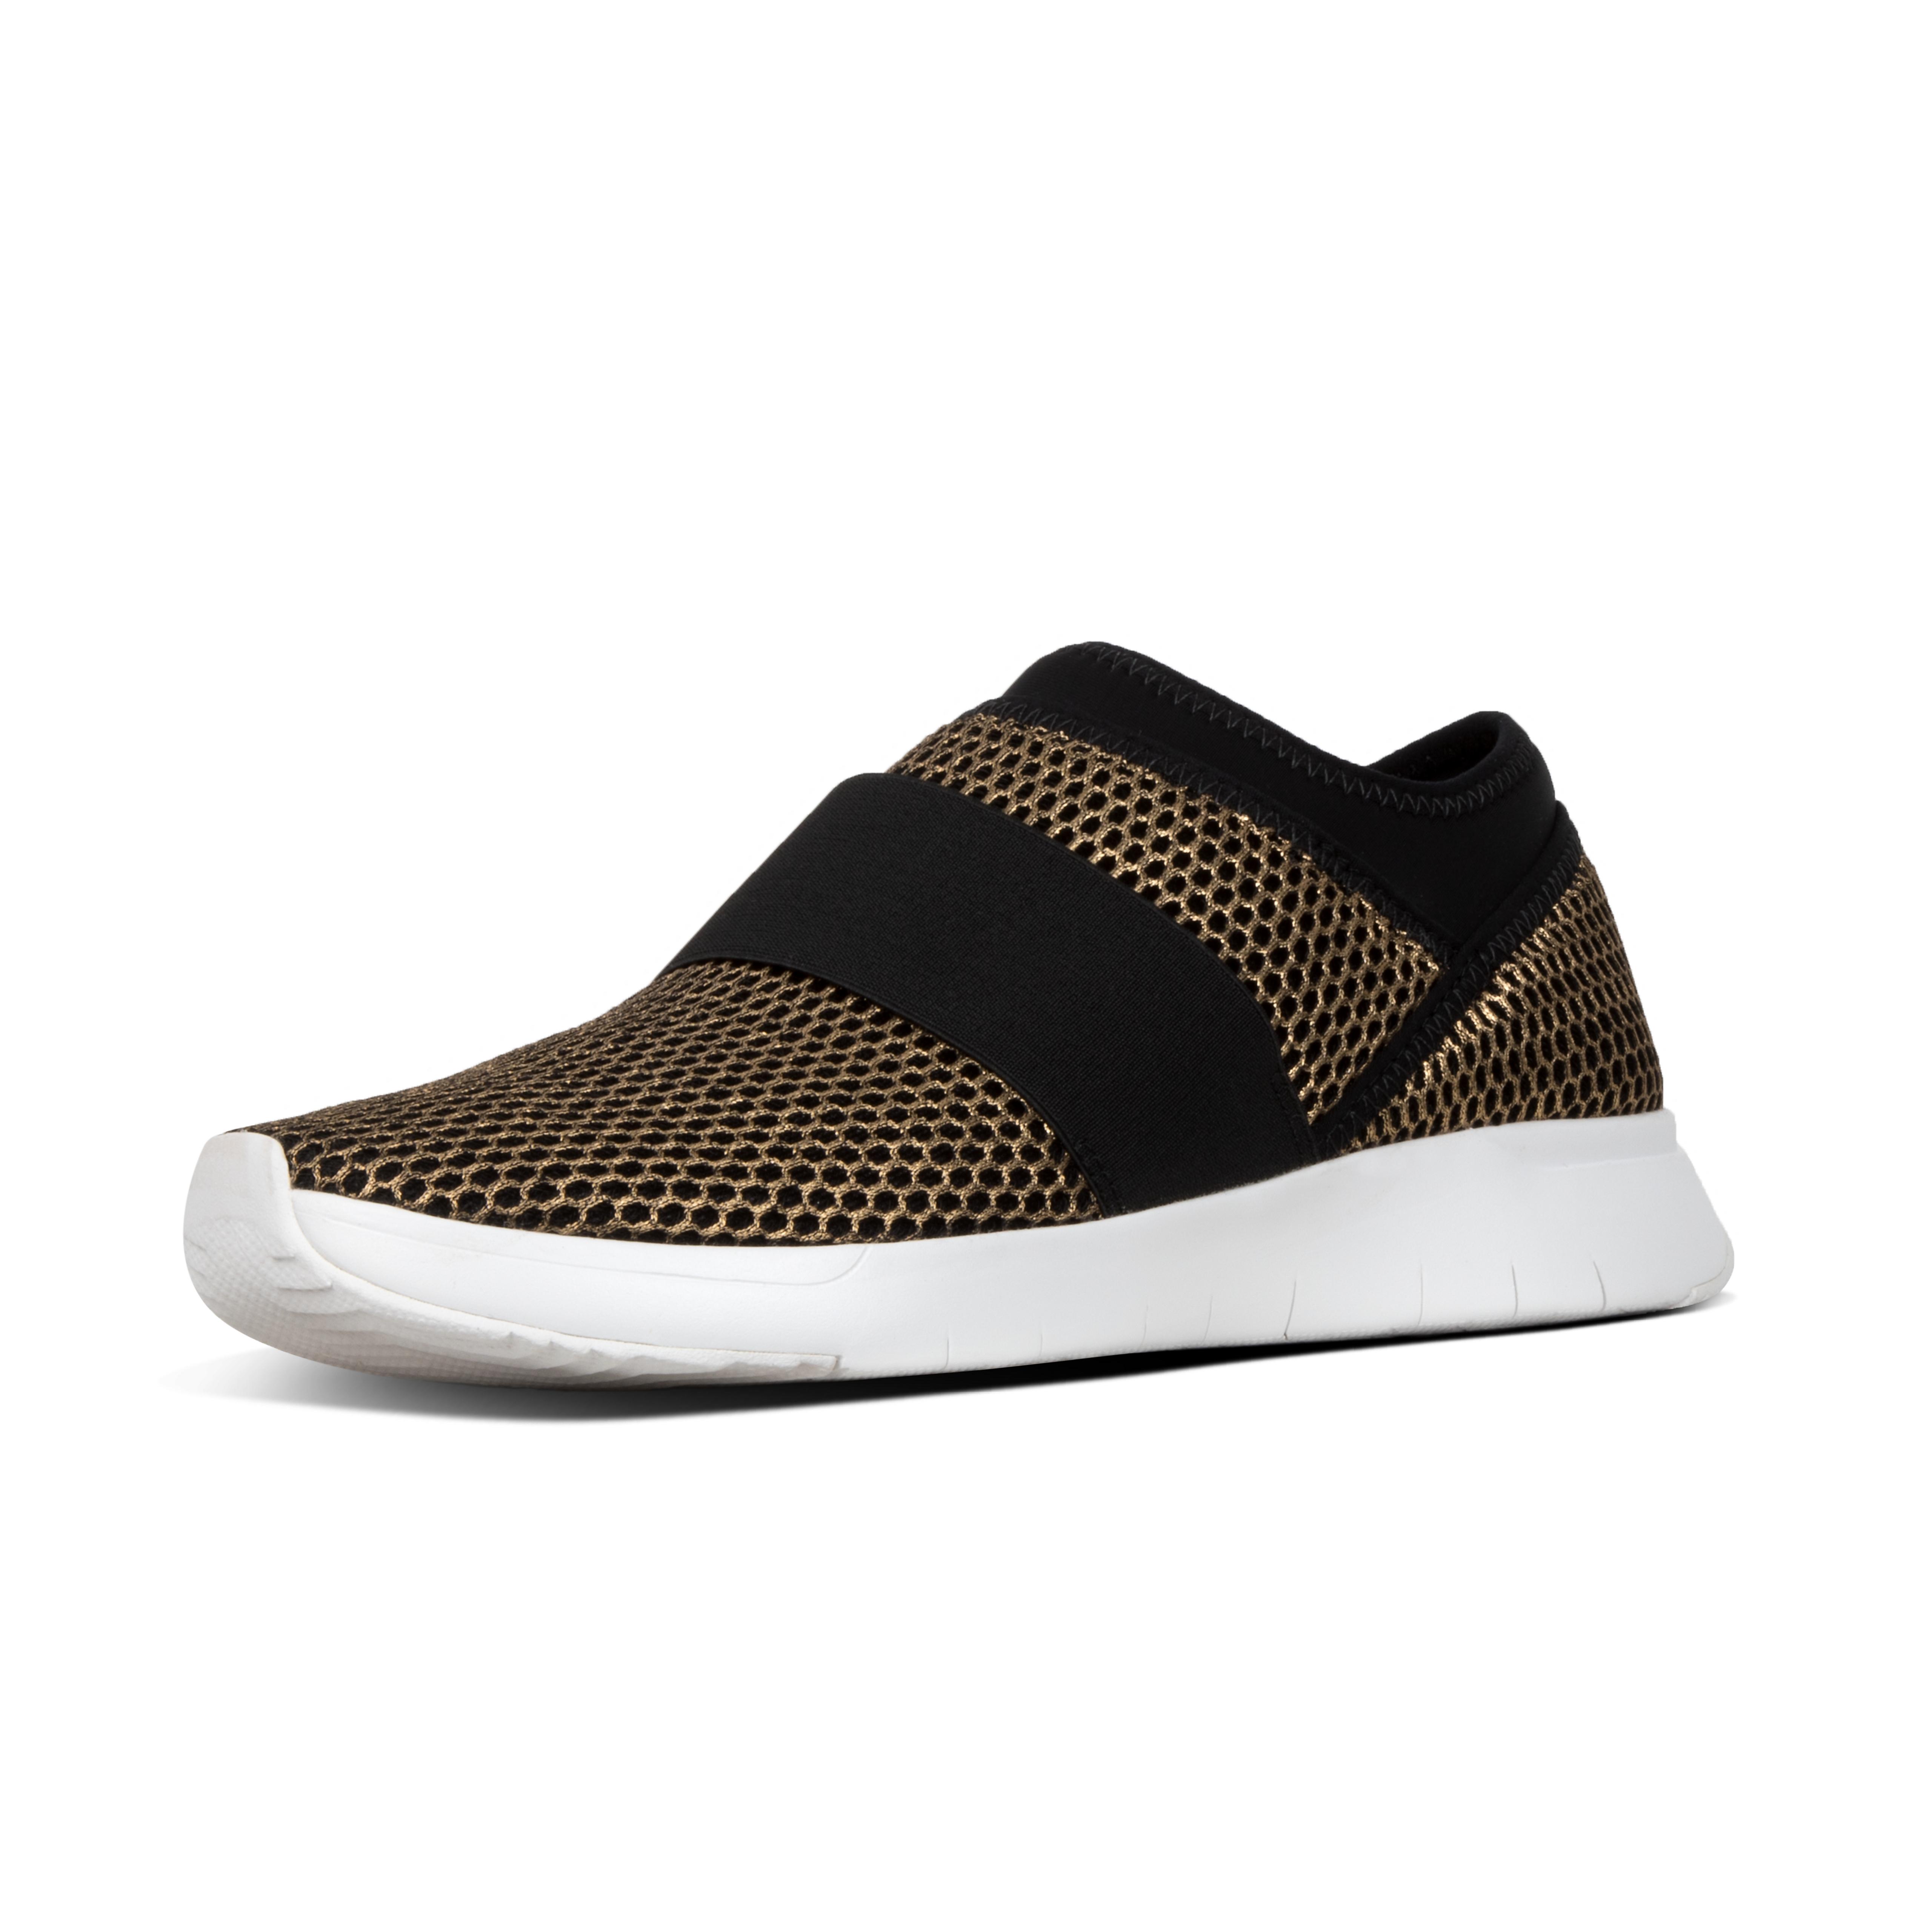 black and gold slip on sneakers